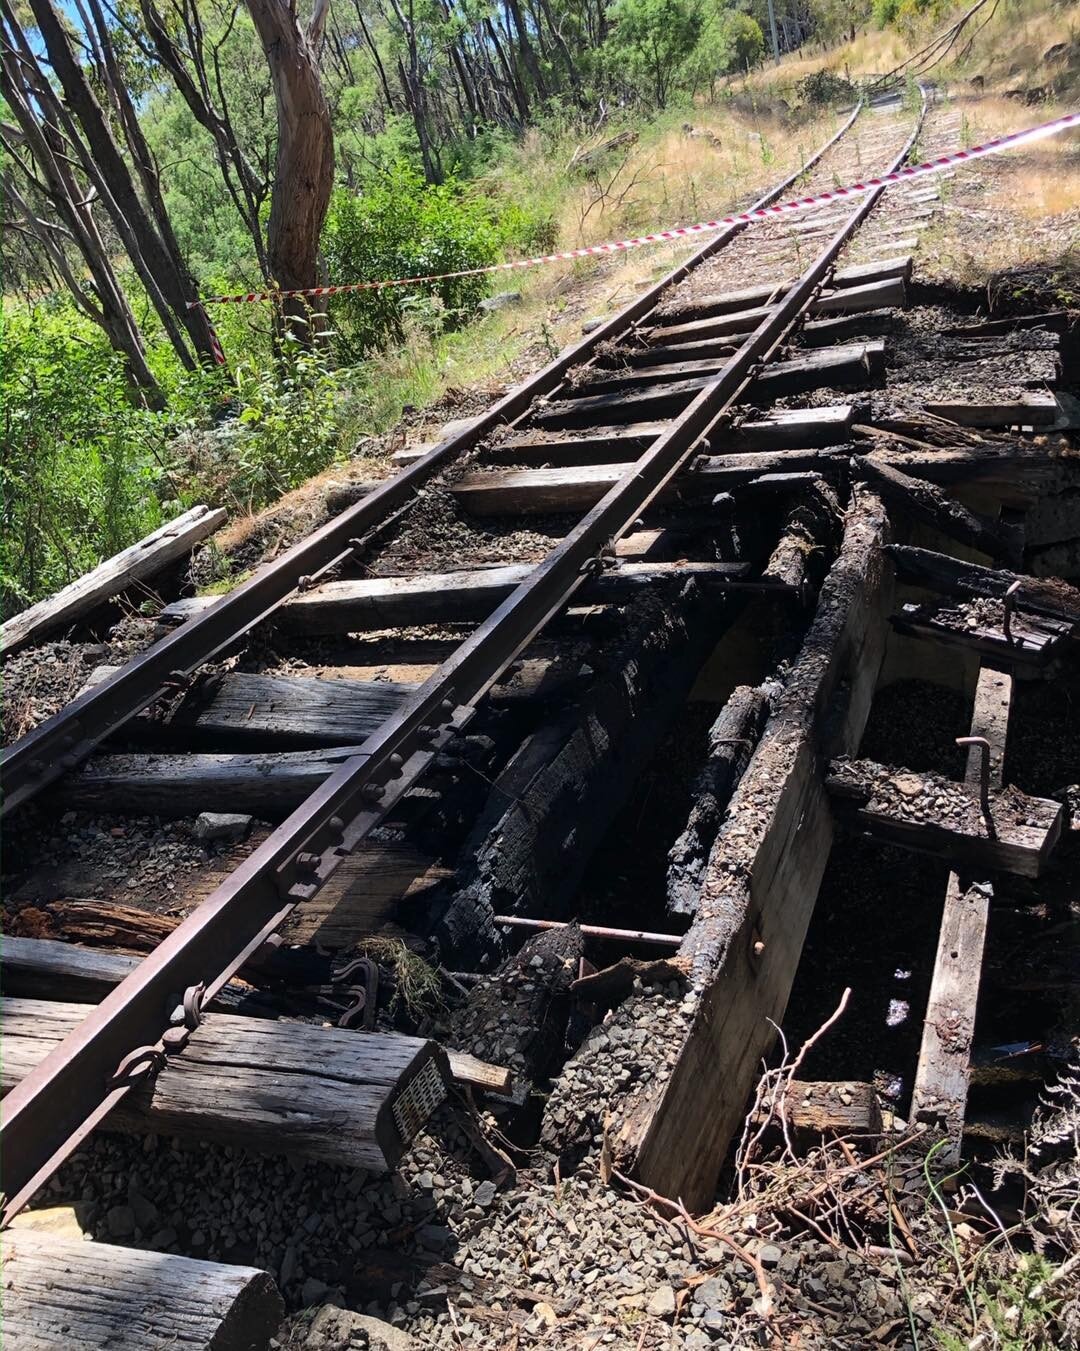 It&rsquo;s very disappointing to report that a bridge near Westerway on the Derwent Valley line has been destroyed by arson attack. This infrastructure is critical to the line being one day reopened and will now have to replaced at significant cost.
